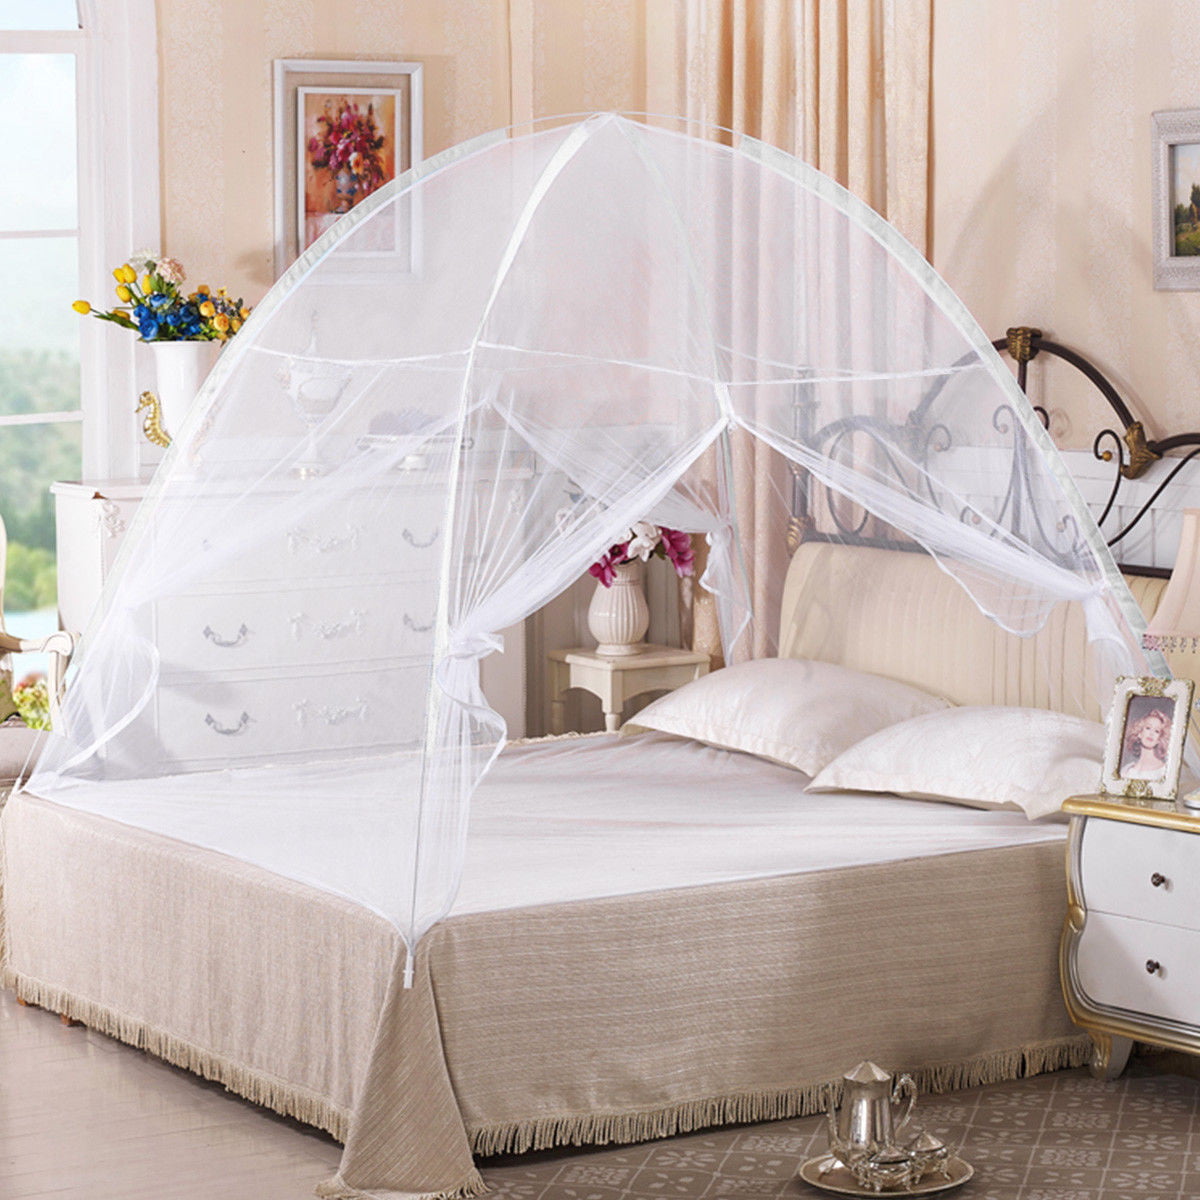 Mosquito Net Portable Automatic Pop Up Anti Tent For With Beds Bites Design Bed